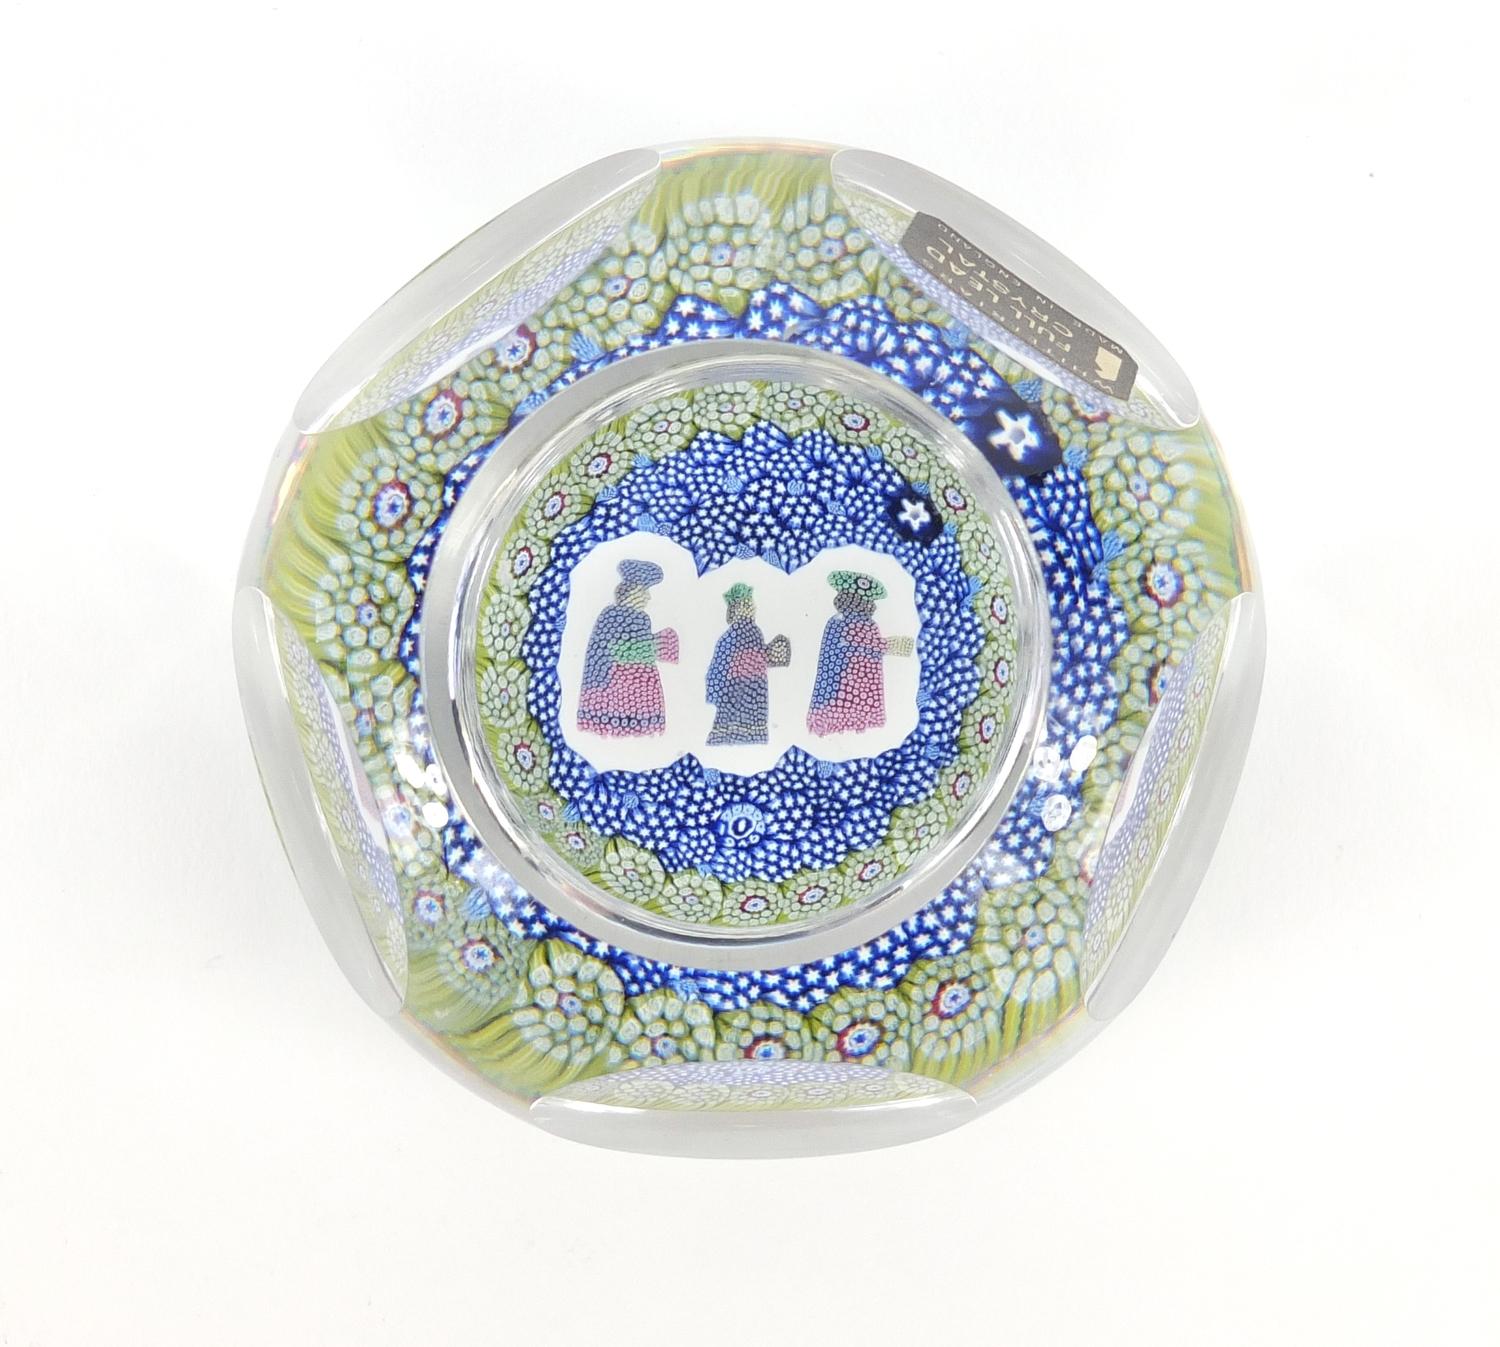 Whitefriars Christmas faceted glass paperweight, numbered 523 with paper label, 8cm in diameter :